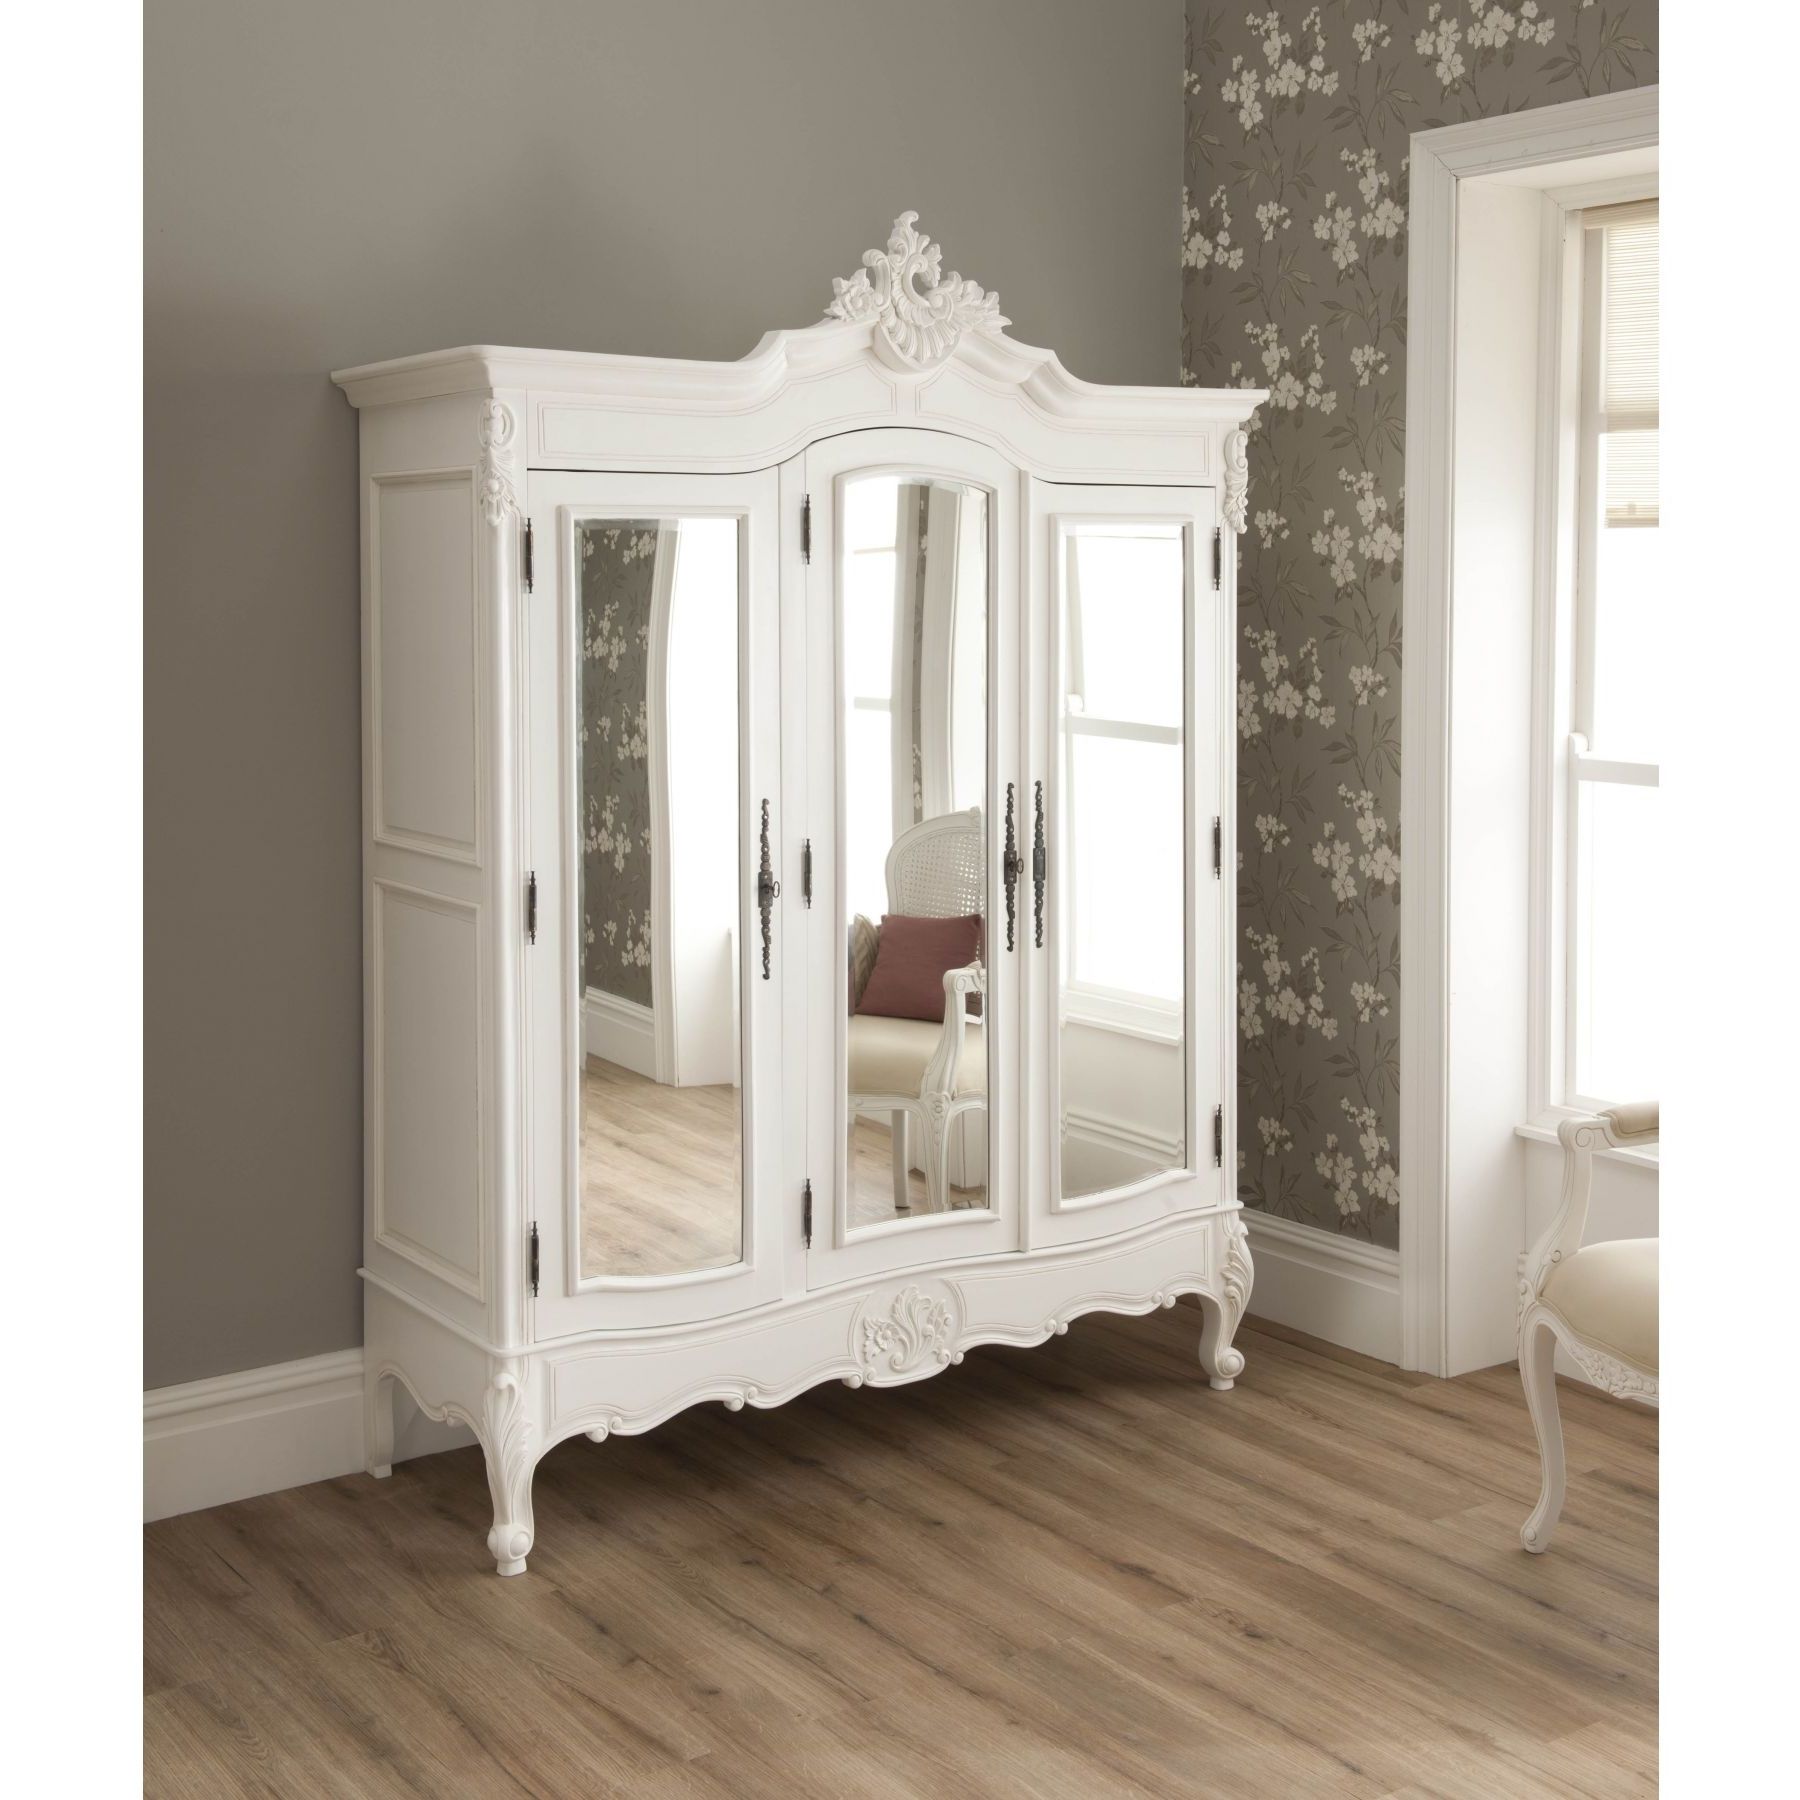 Chic Wardrobes With Regard To Well Liked La Rochelle Shabby Chic Antique Style Wardrobe (View 1 of 15)